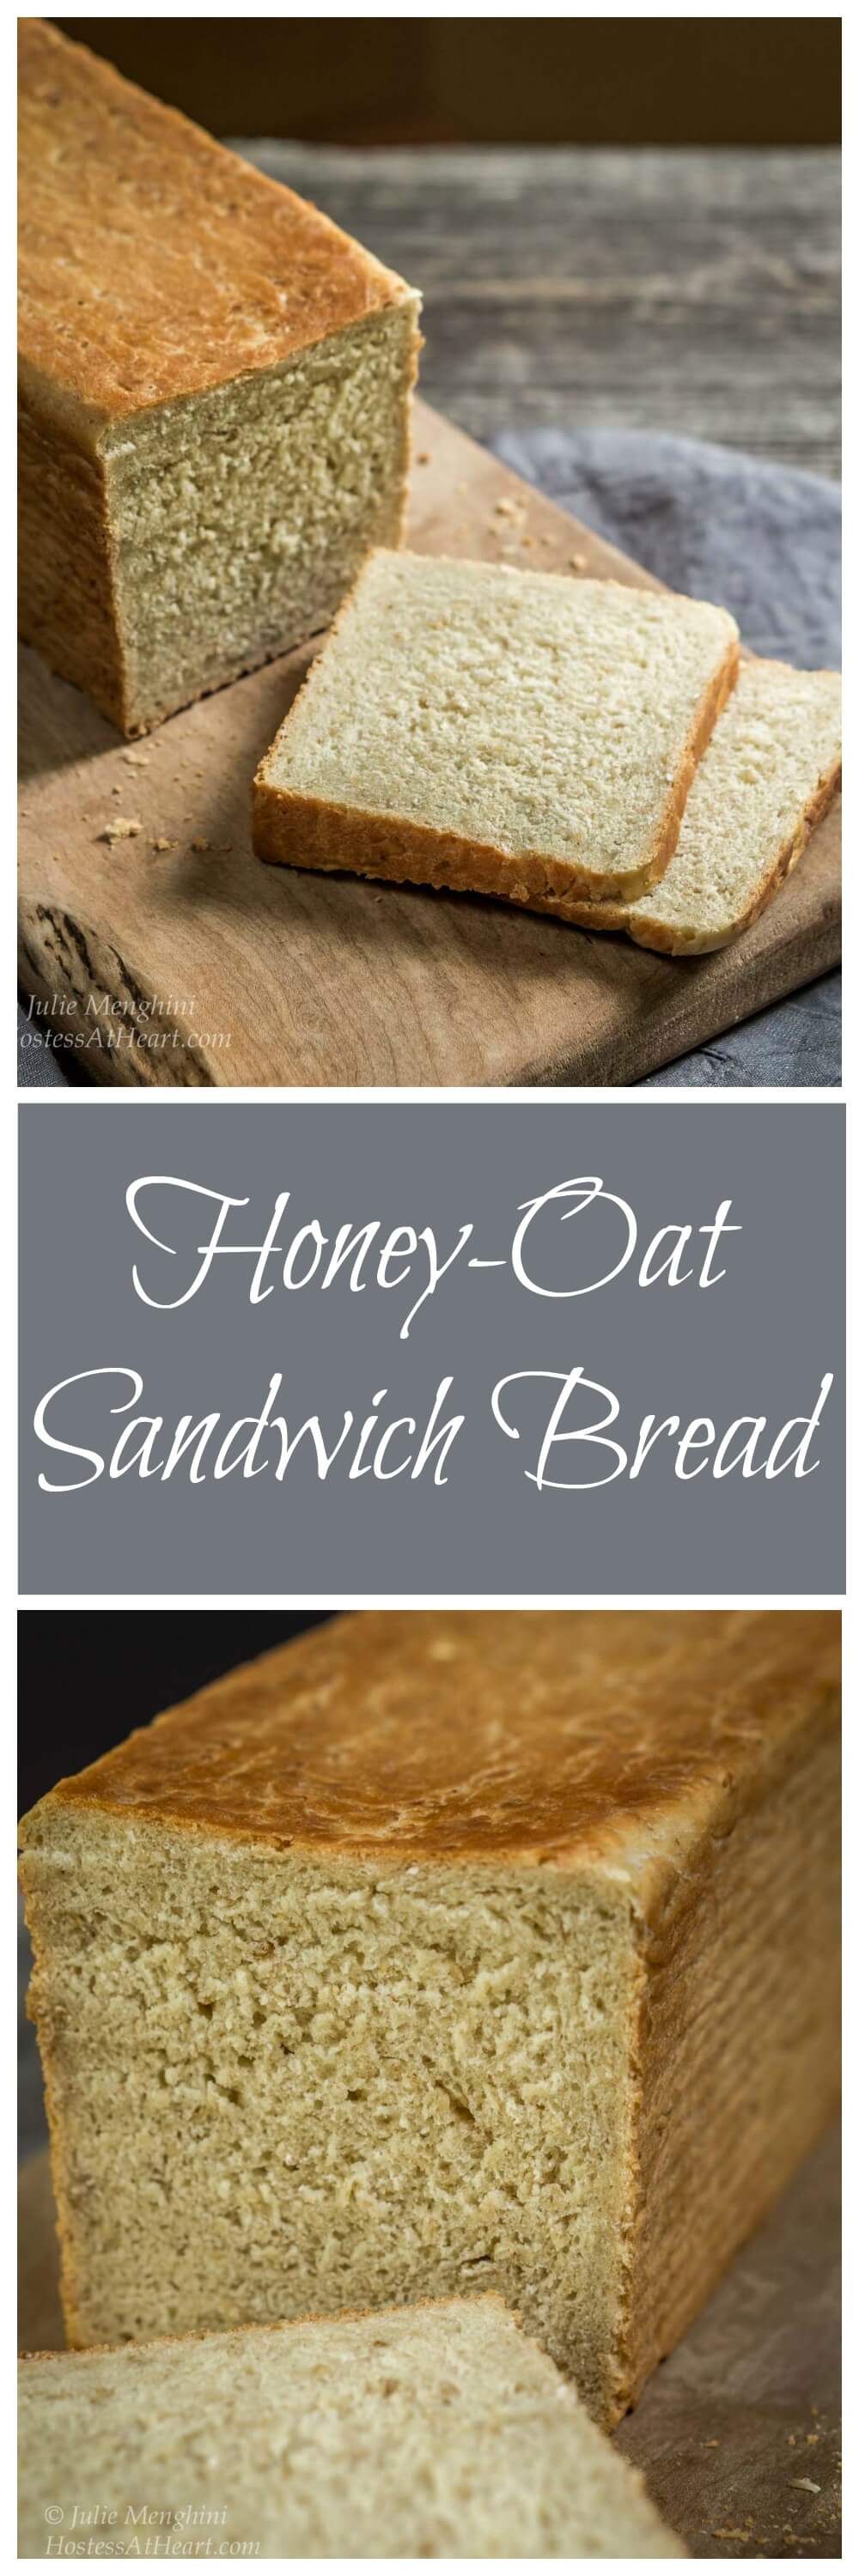 Two photos for Pinterest. The top photo is of an angled photo of a loaf of Honey Oat Pain de Mie sandwich bread with two slices cut from the front sitting on a cutting board. The bottom photo is a table view photo of the bread showing the cut side of the bread with a soft center and brown crust.